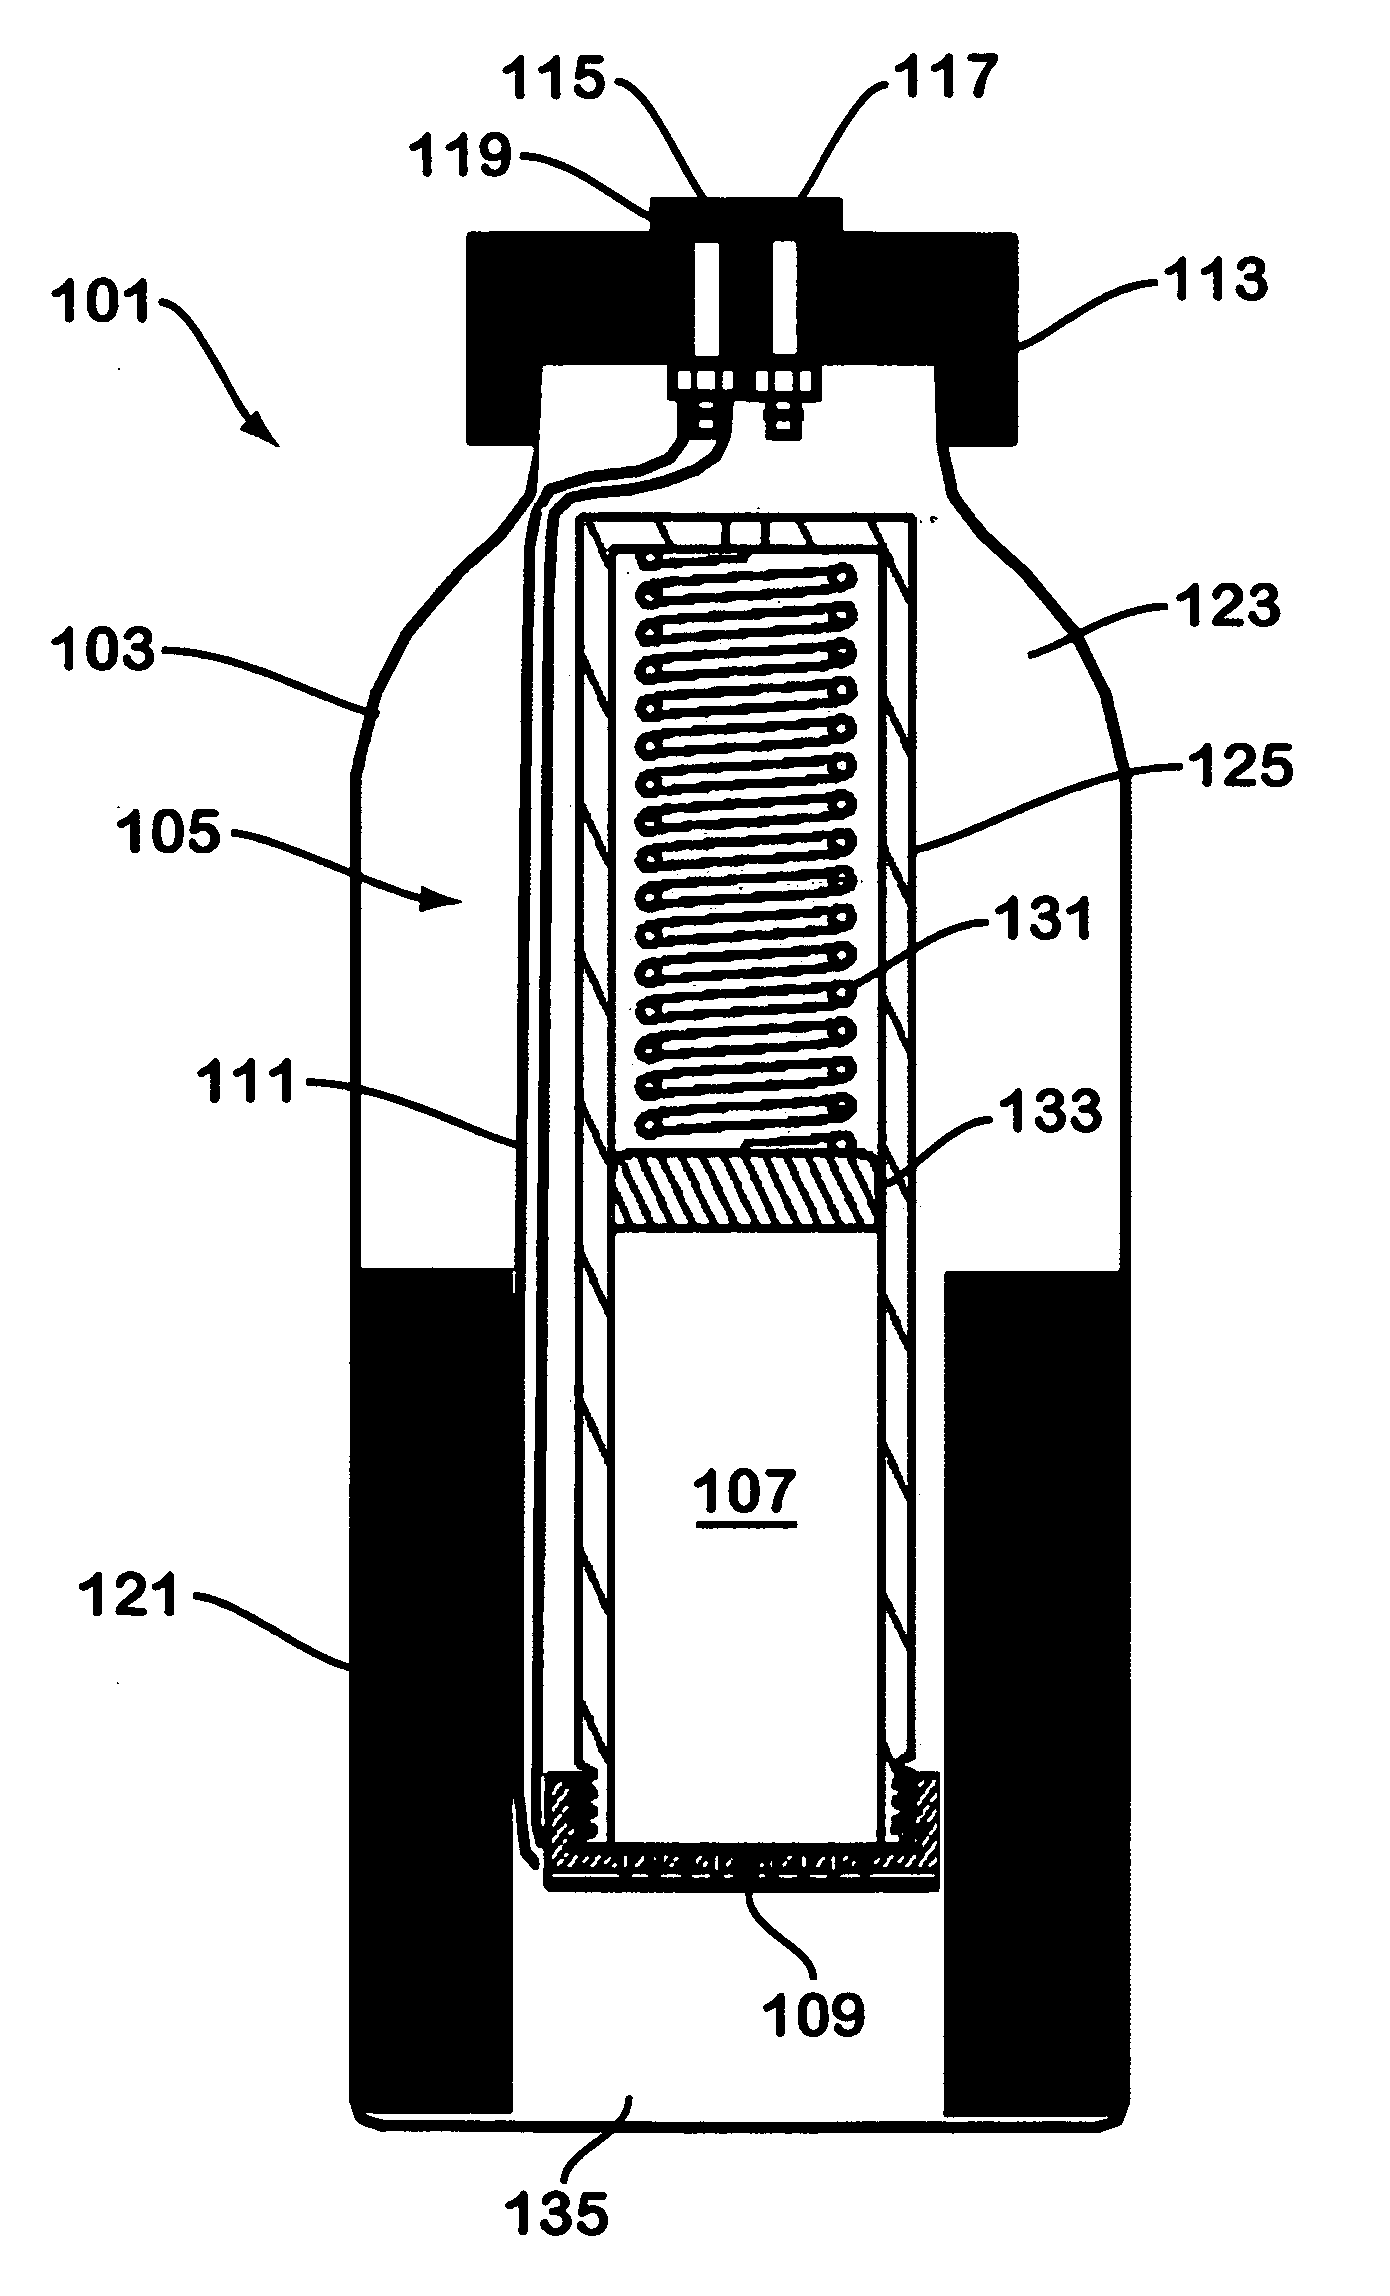 Solid chemical hydride dispenser for generating hydrogen gas